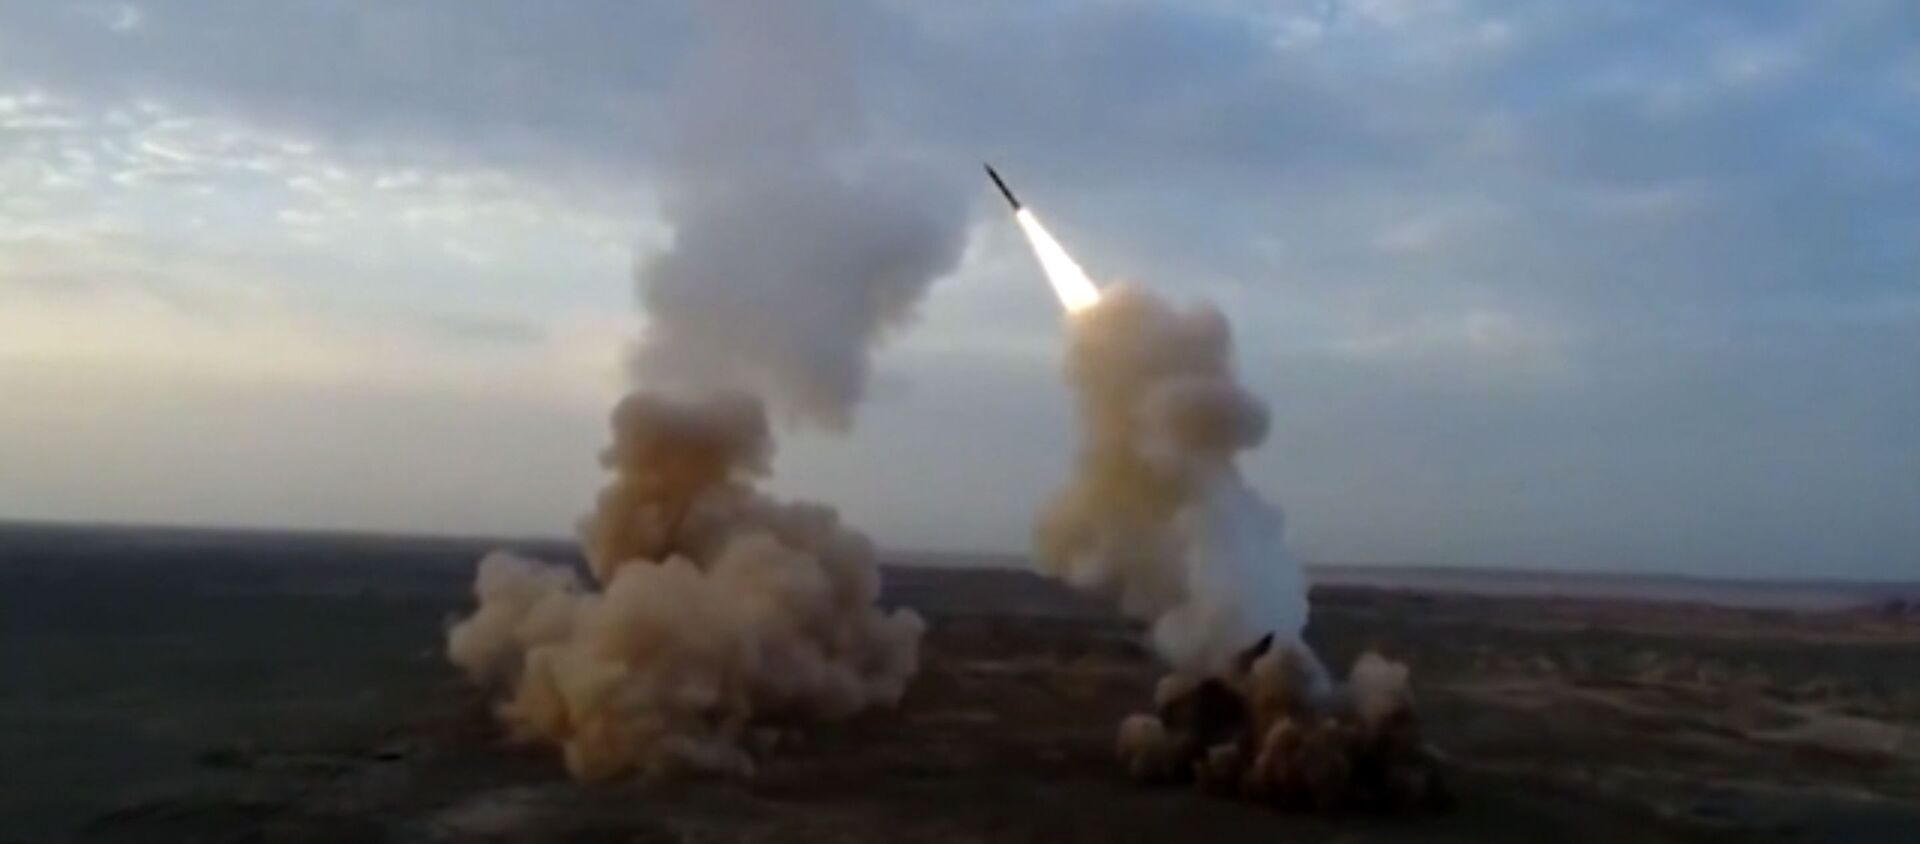 This video grab shows launching underground ballistic missiles by the Iranian Revolutionary Guard during a military exercise. - Sputnik International, 1920, 06.01.2021